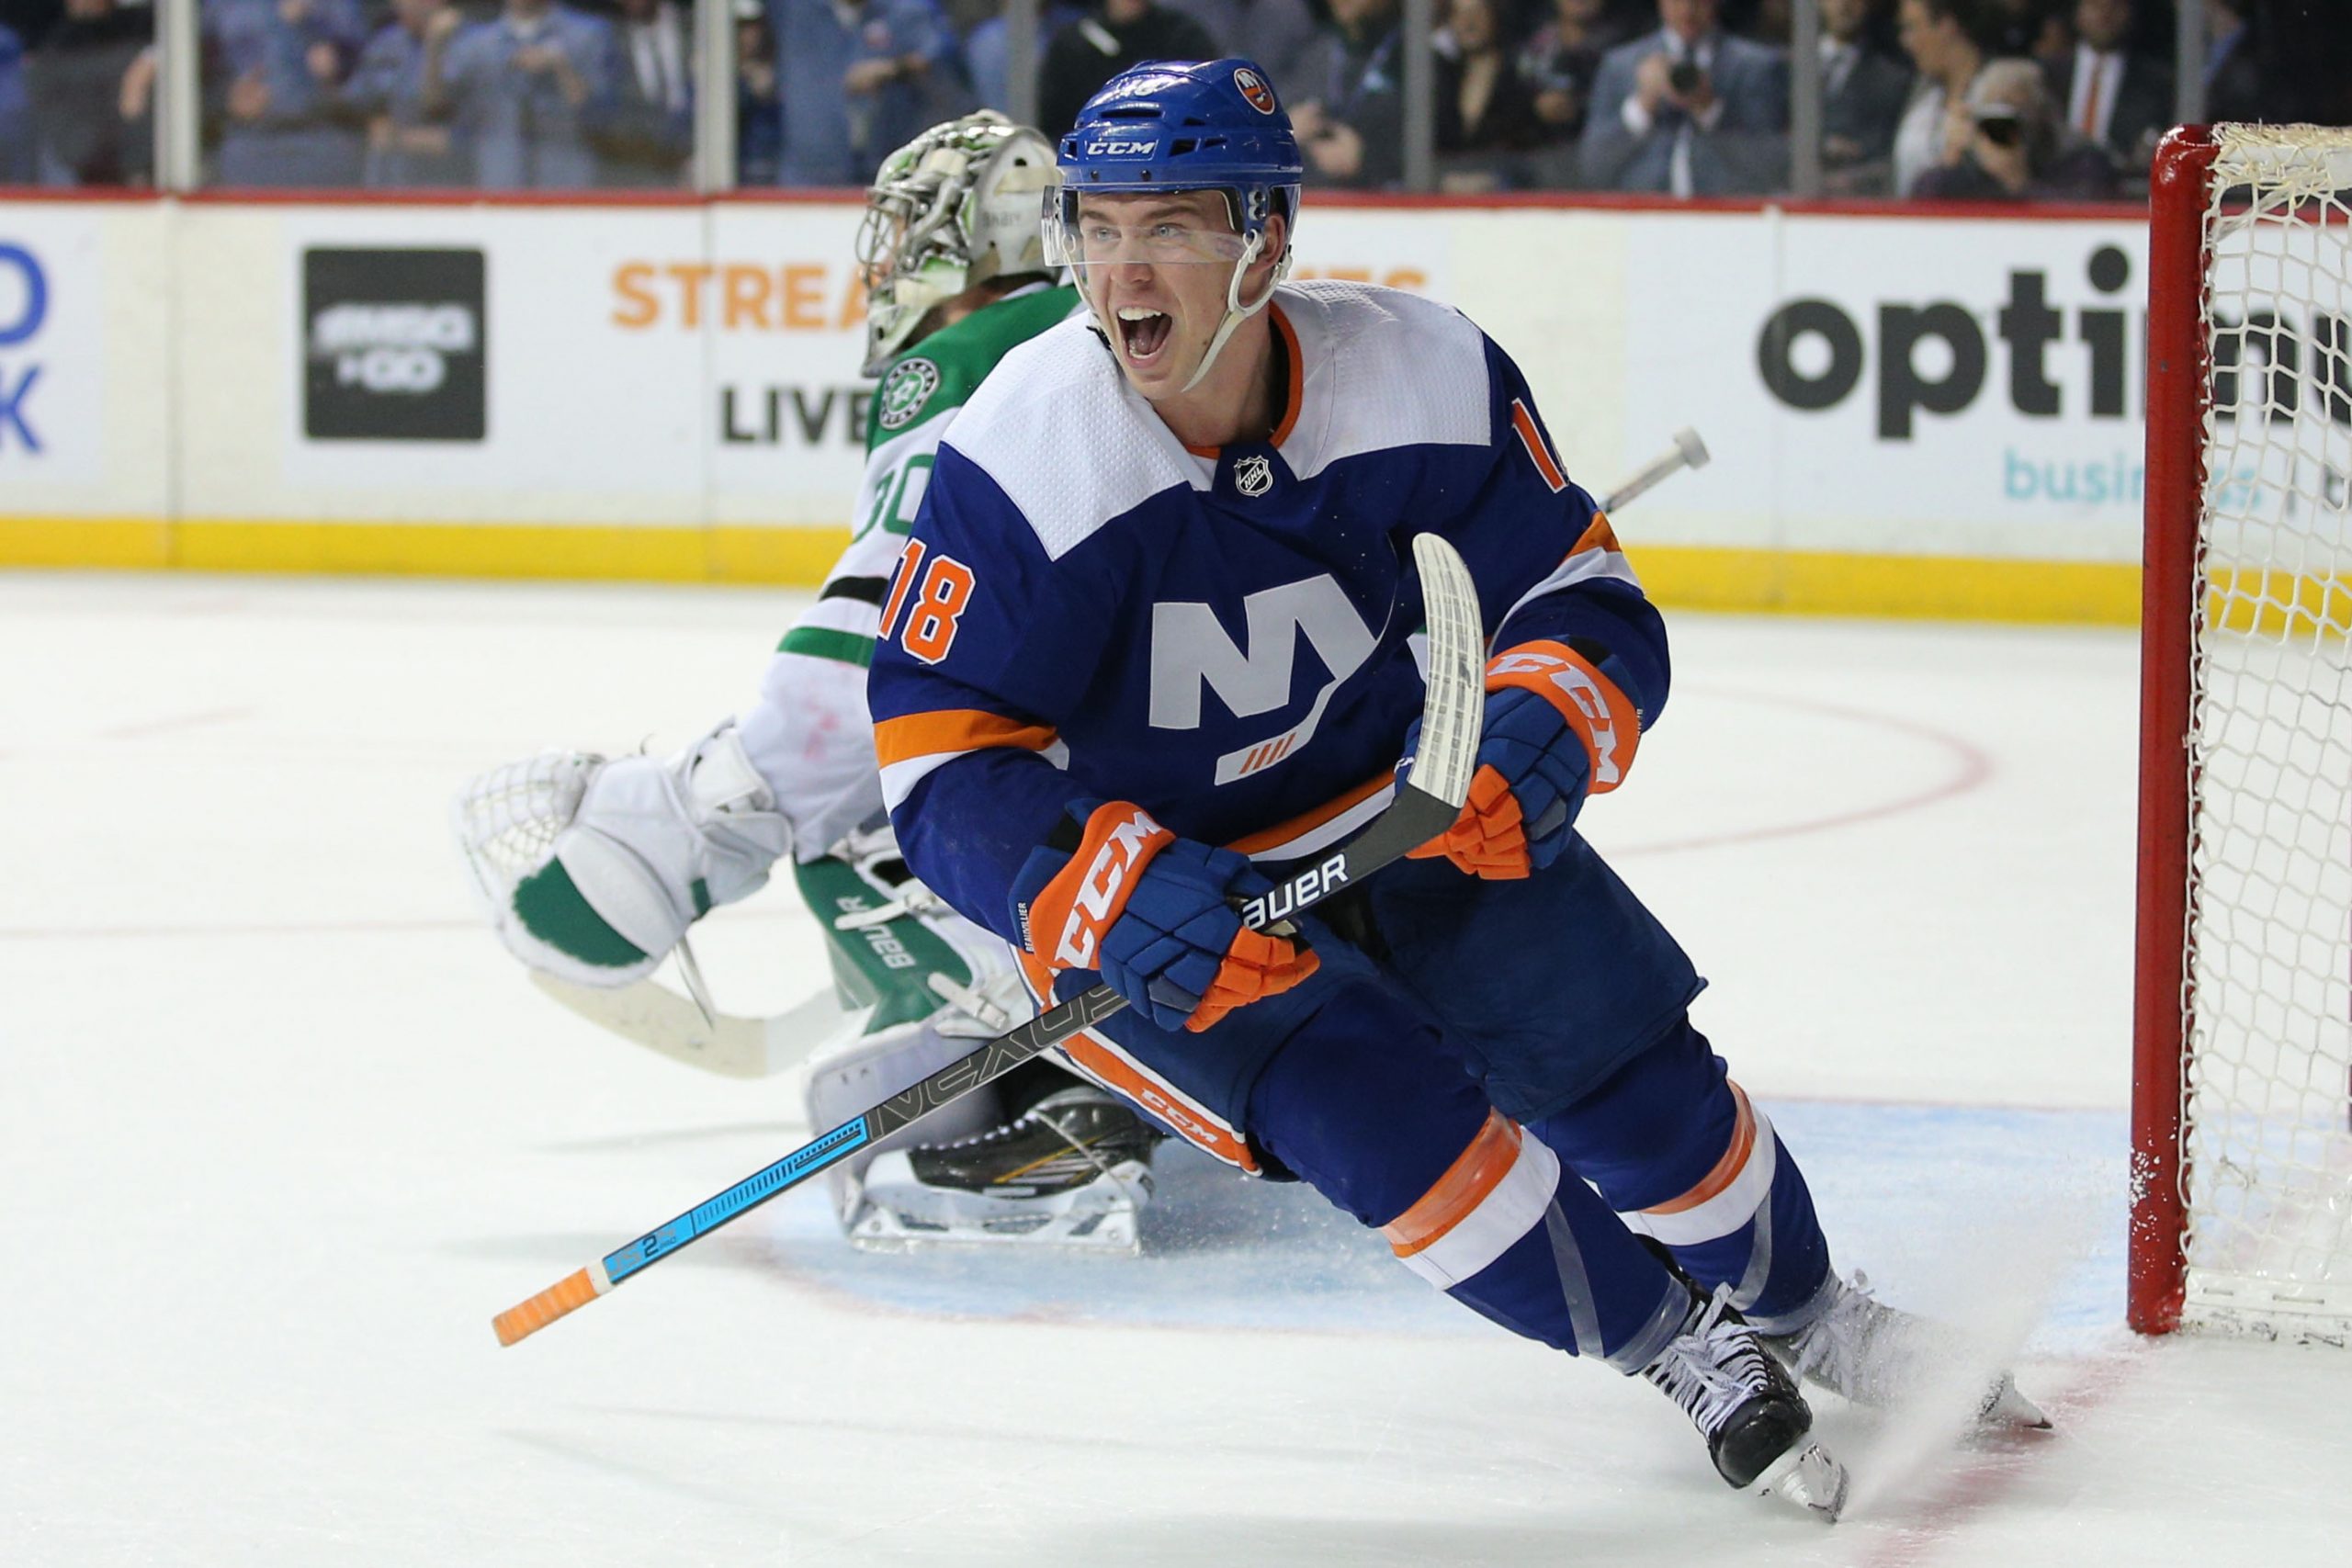 Feb 4, 2020; Brooklyn, New York, USA; New York Islanders left wing Anthony Beauvillier (18) reacts after scoring the game winning goal on a breakaway against Dallas Stars goalie Ben Bishop (30) during overtime at Barclays Center. Mandatory Credit: Brad Penner-USA TODAY Sports